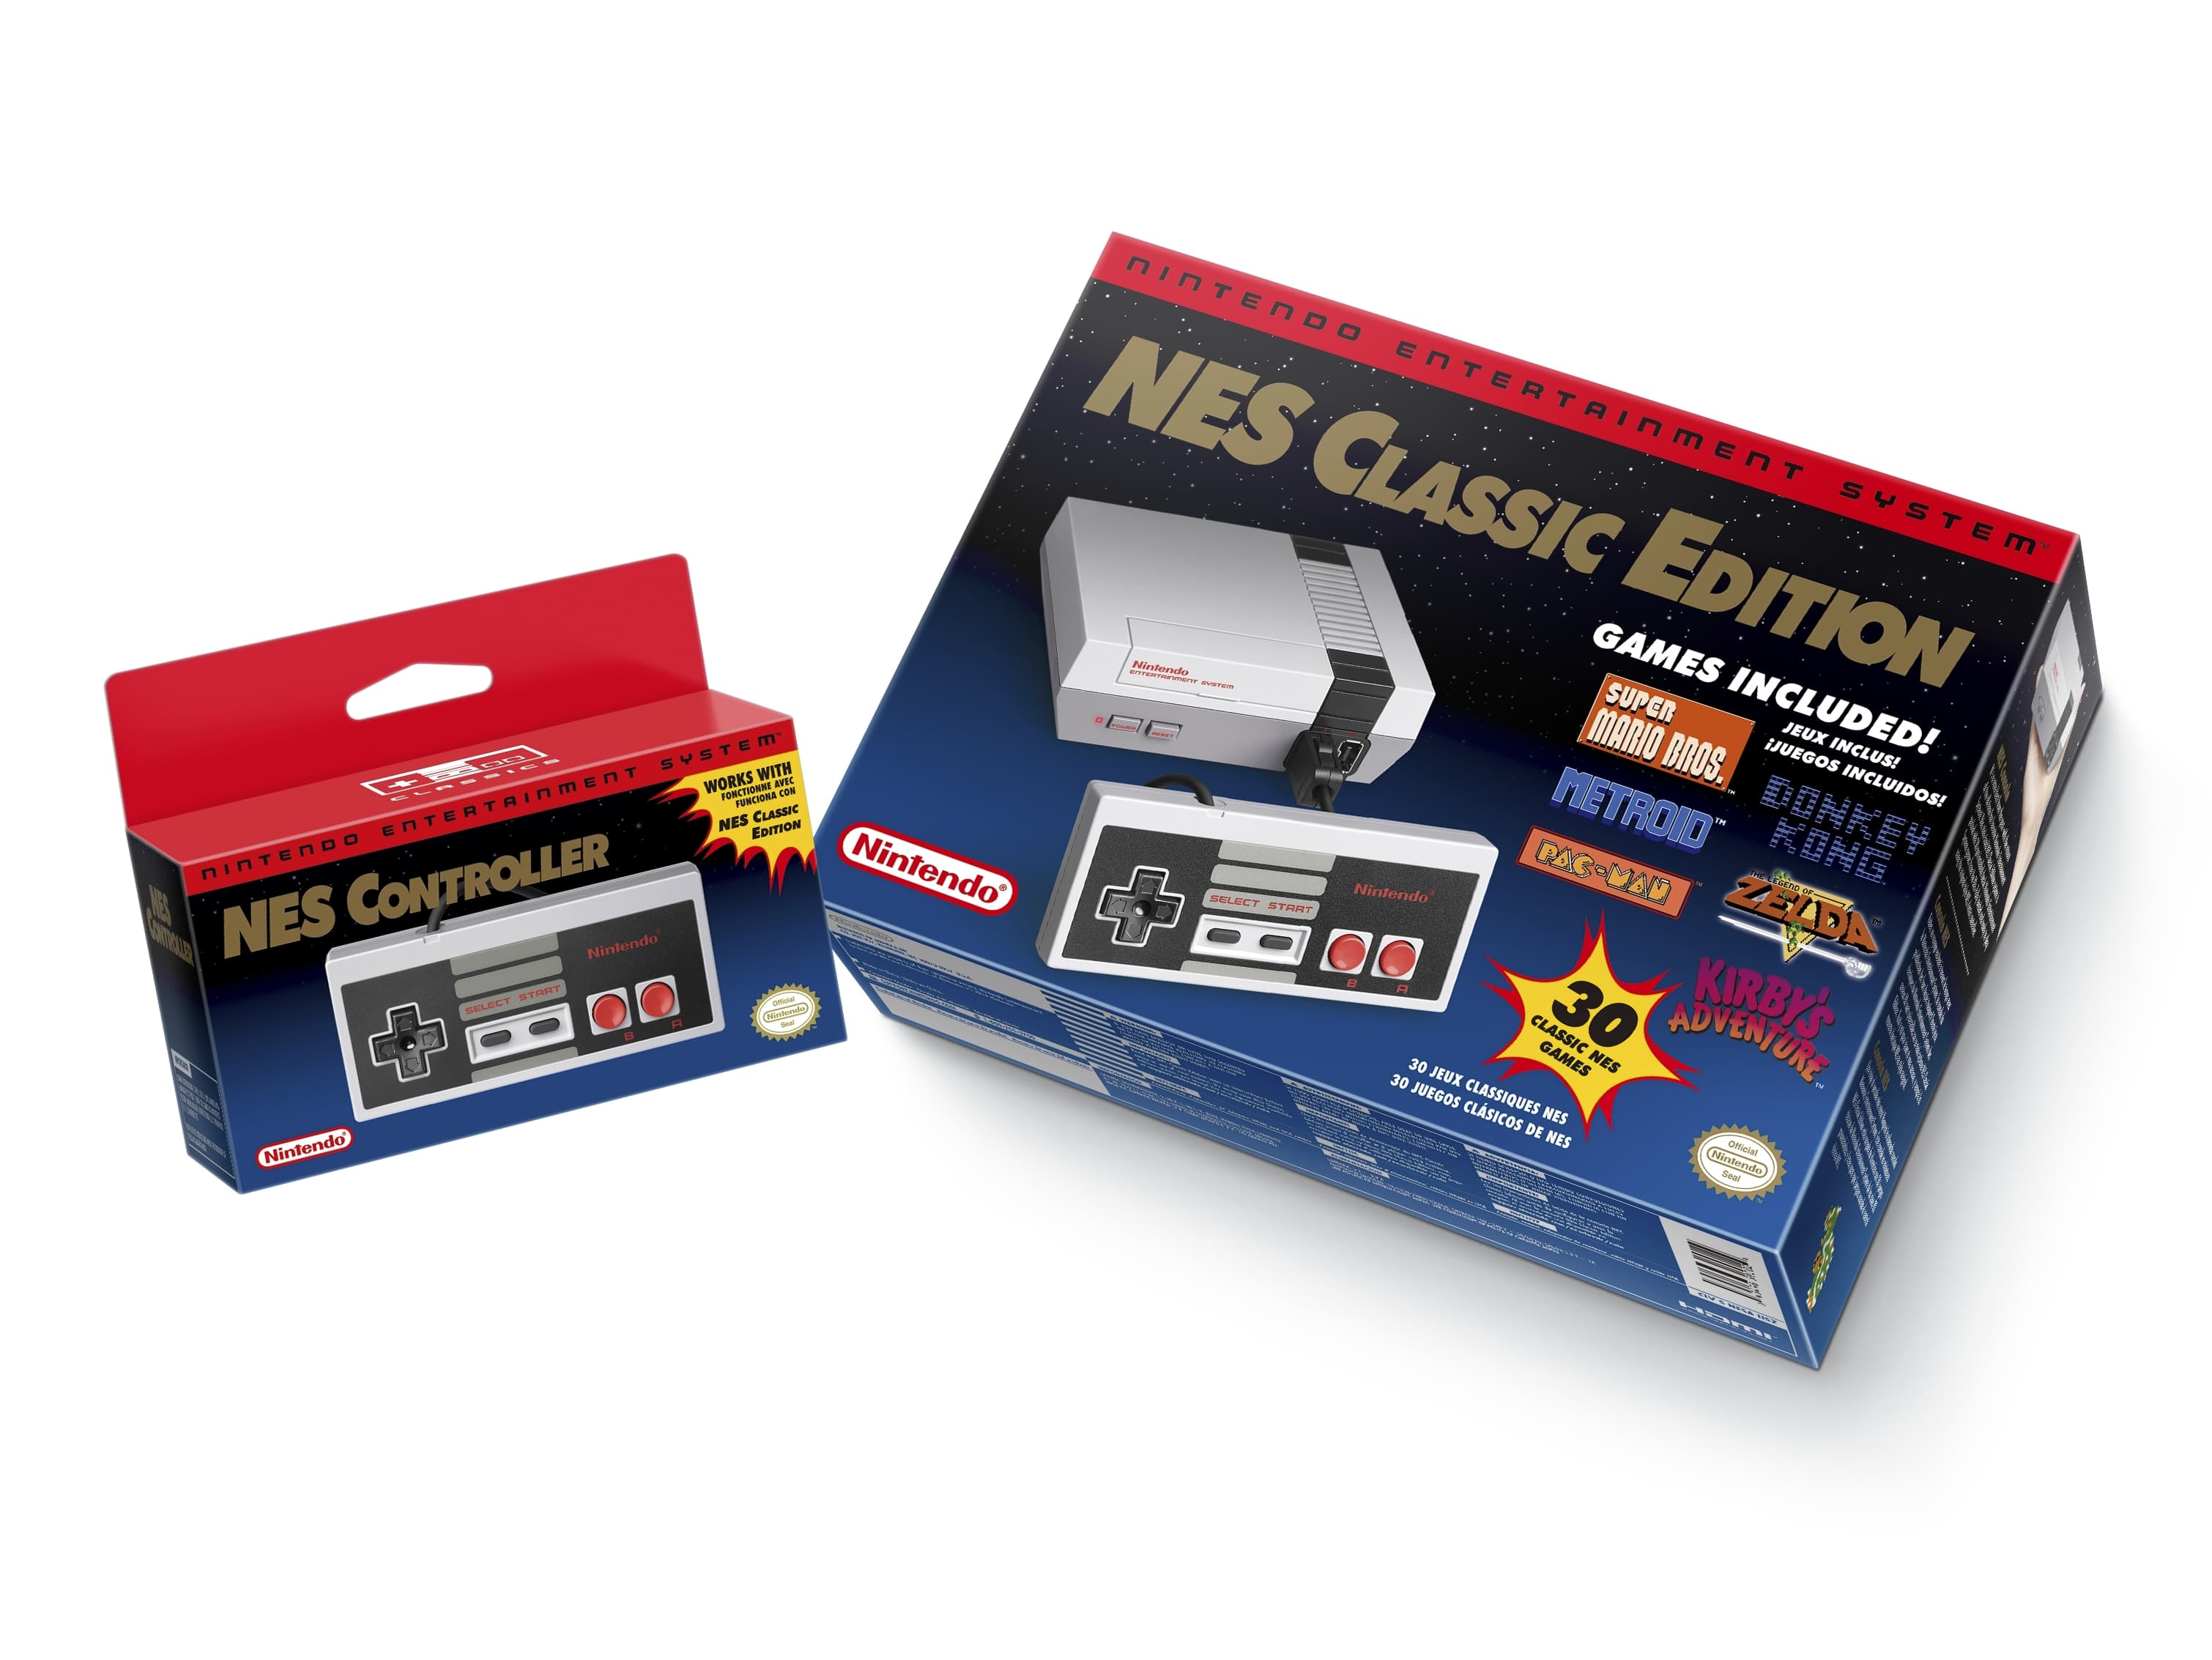 Nintendo Entertainment System Nes Classic Edition Packaging Fonts In Use